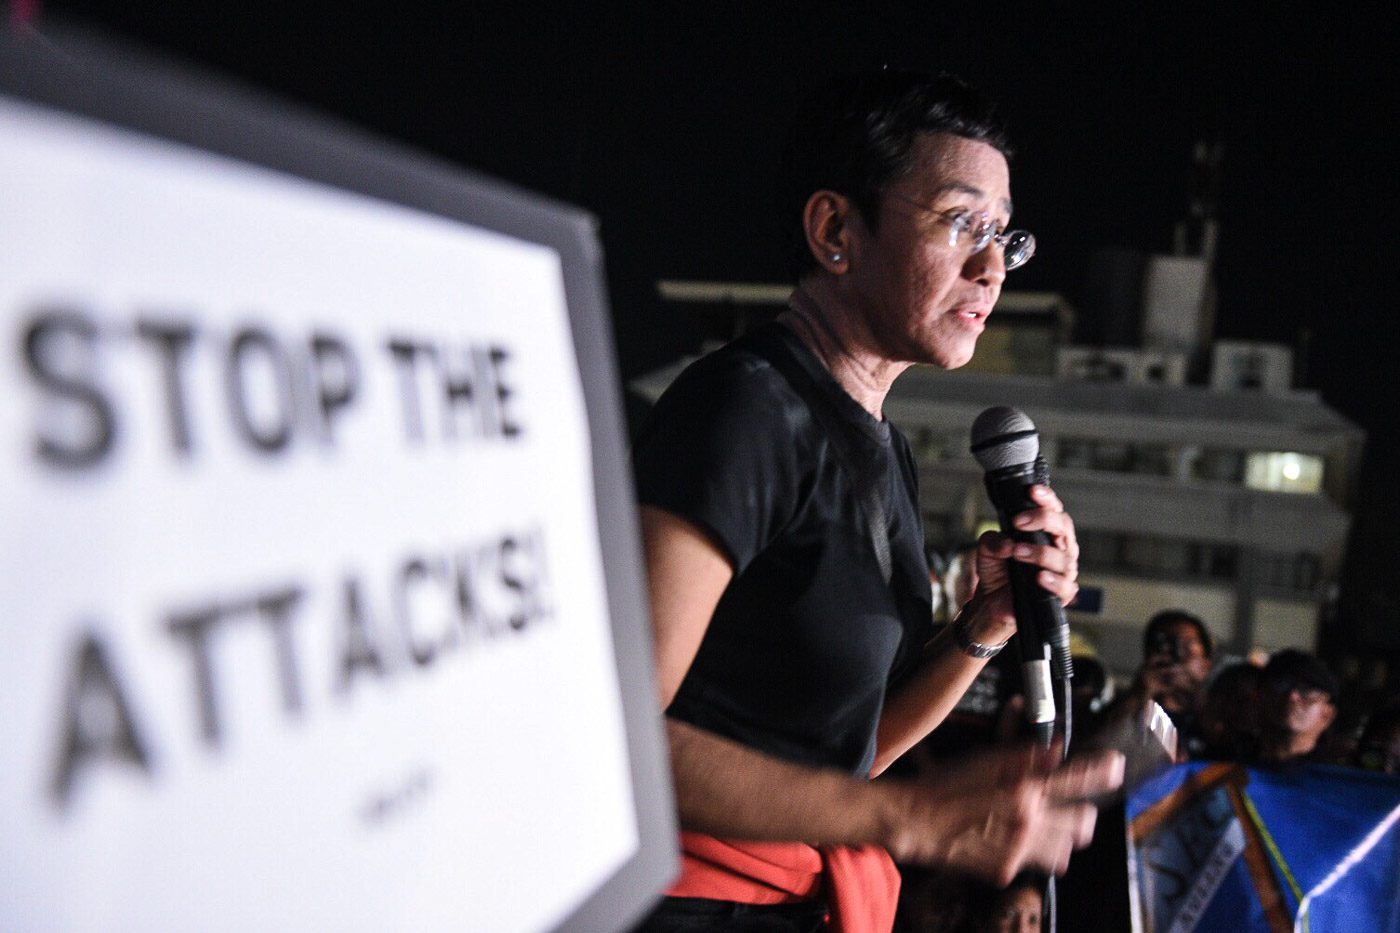 Princeton alumni, students call for end to ‘intimidation campaign’ vs Maria Ressa